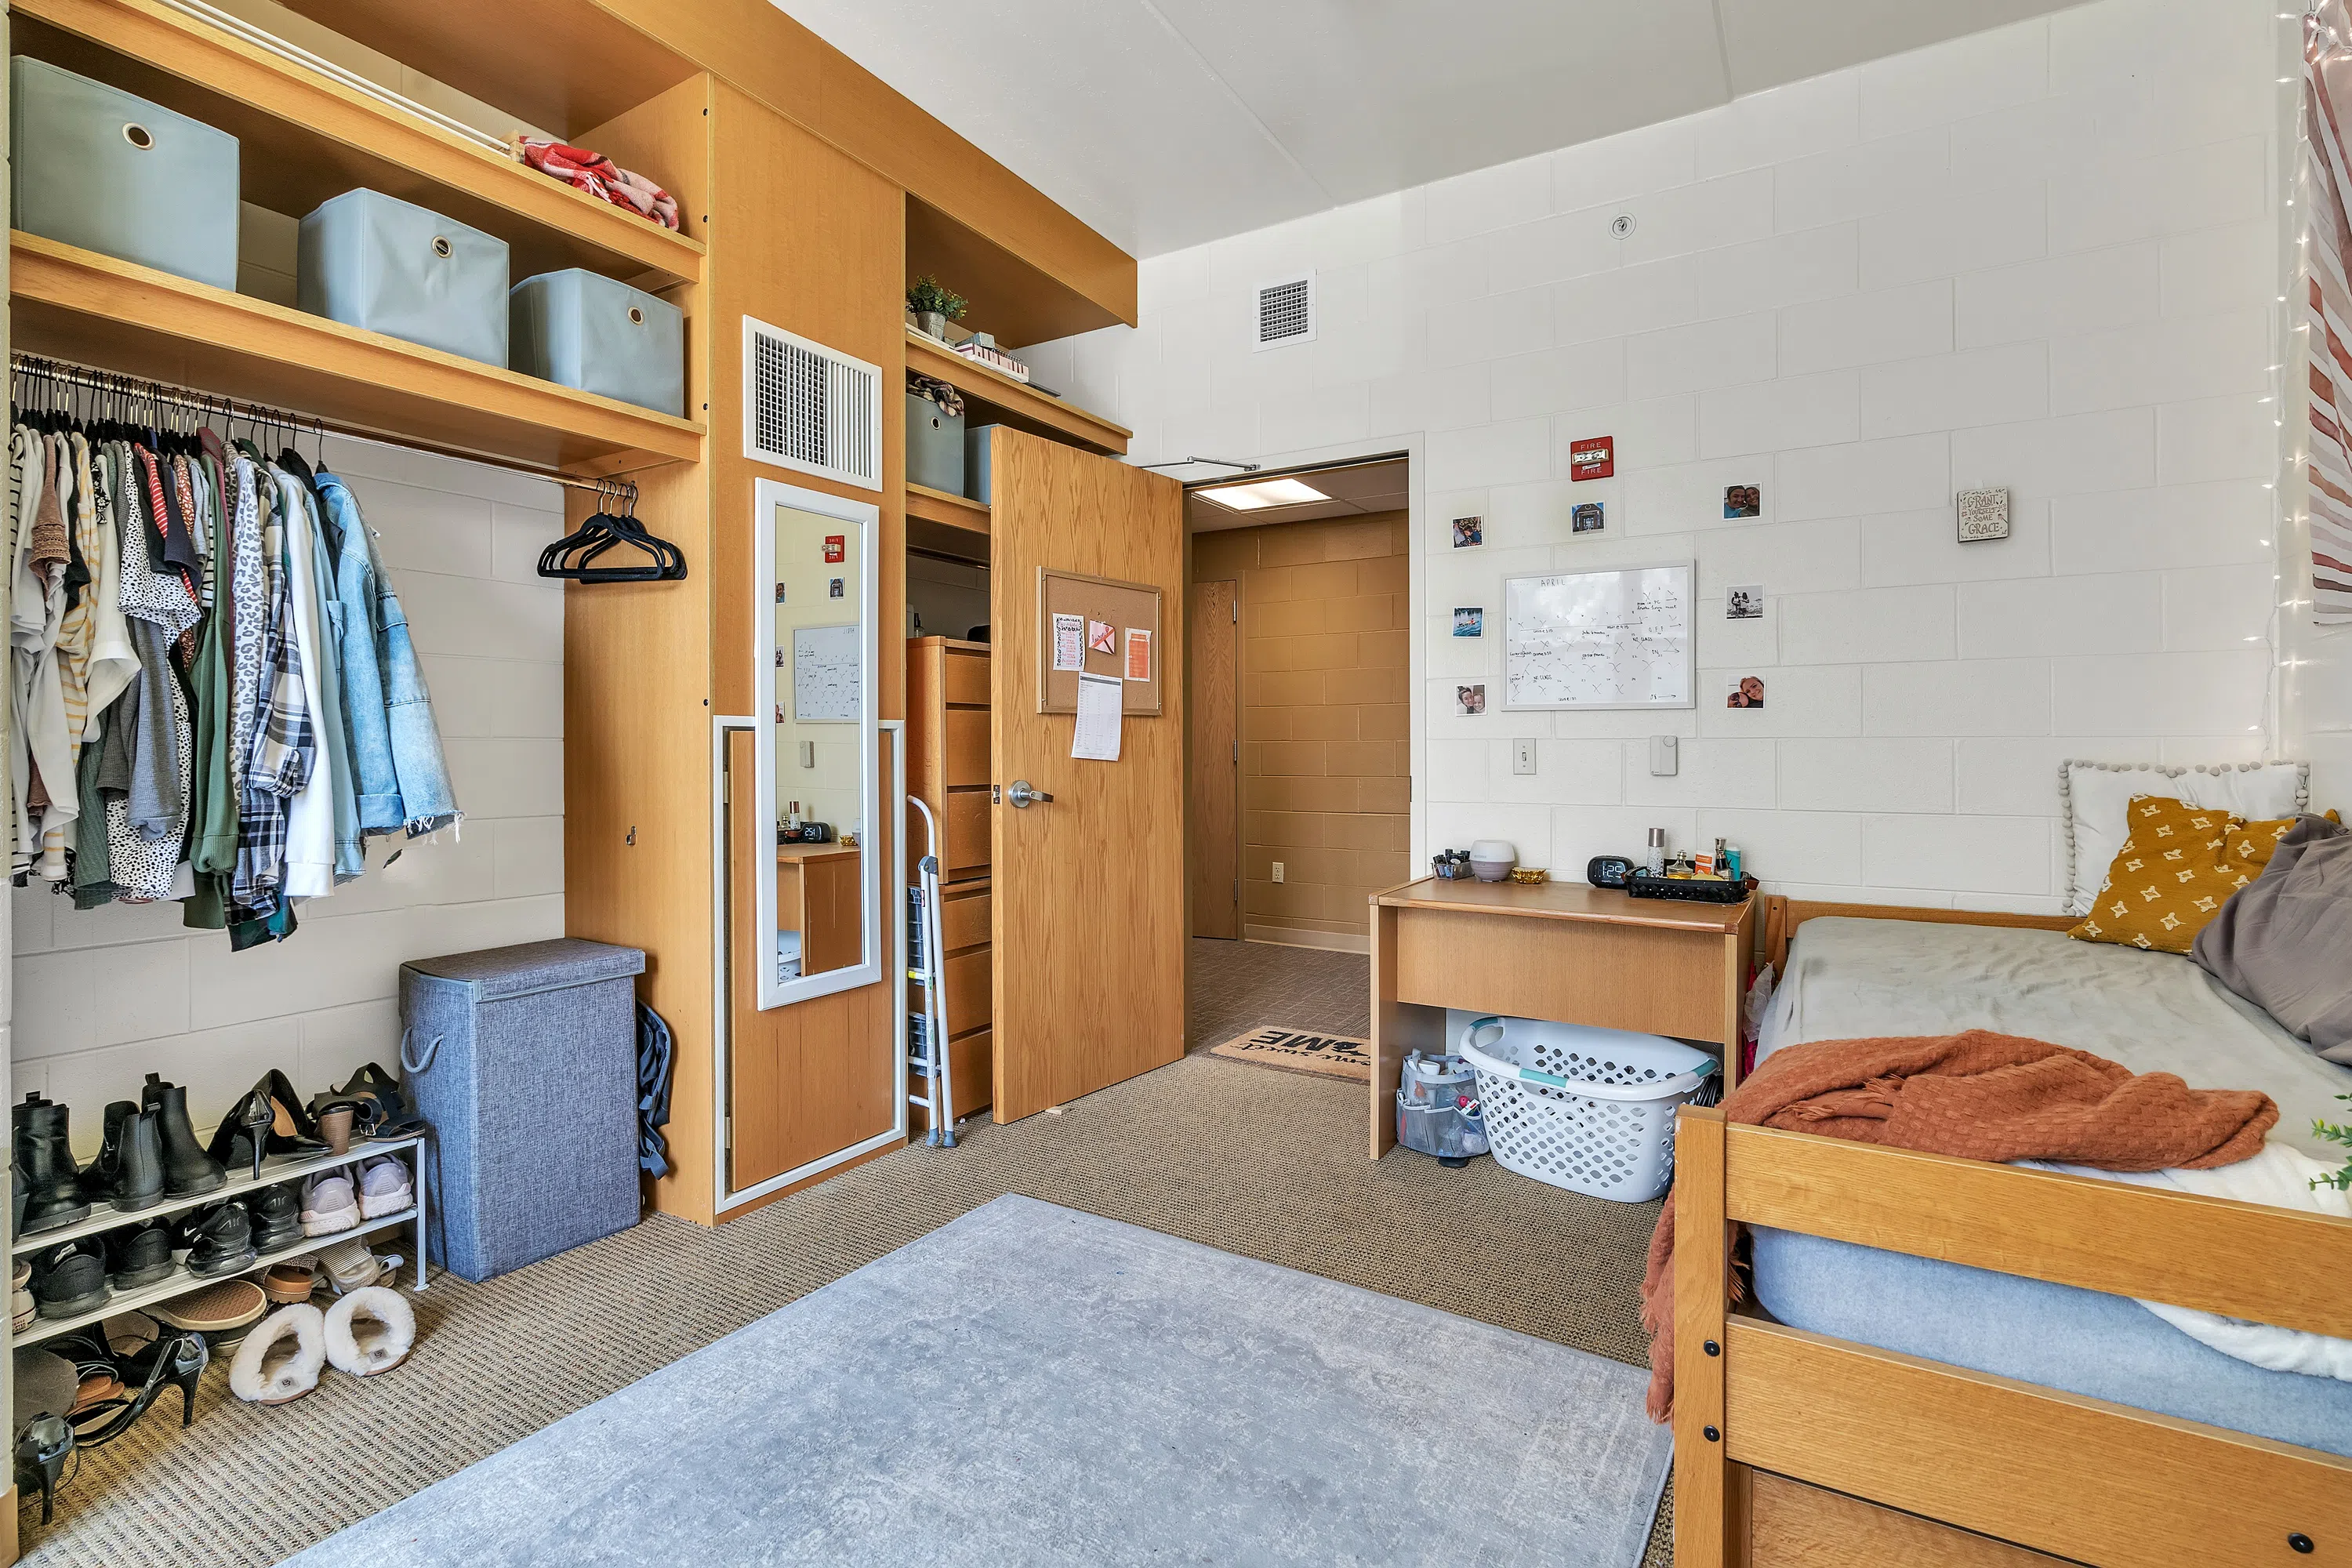 Residence hall room in Gainey Hall